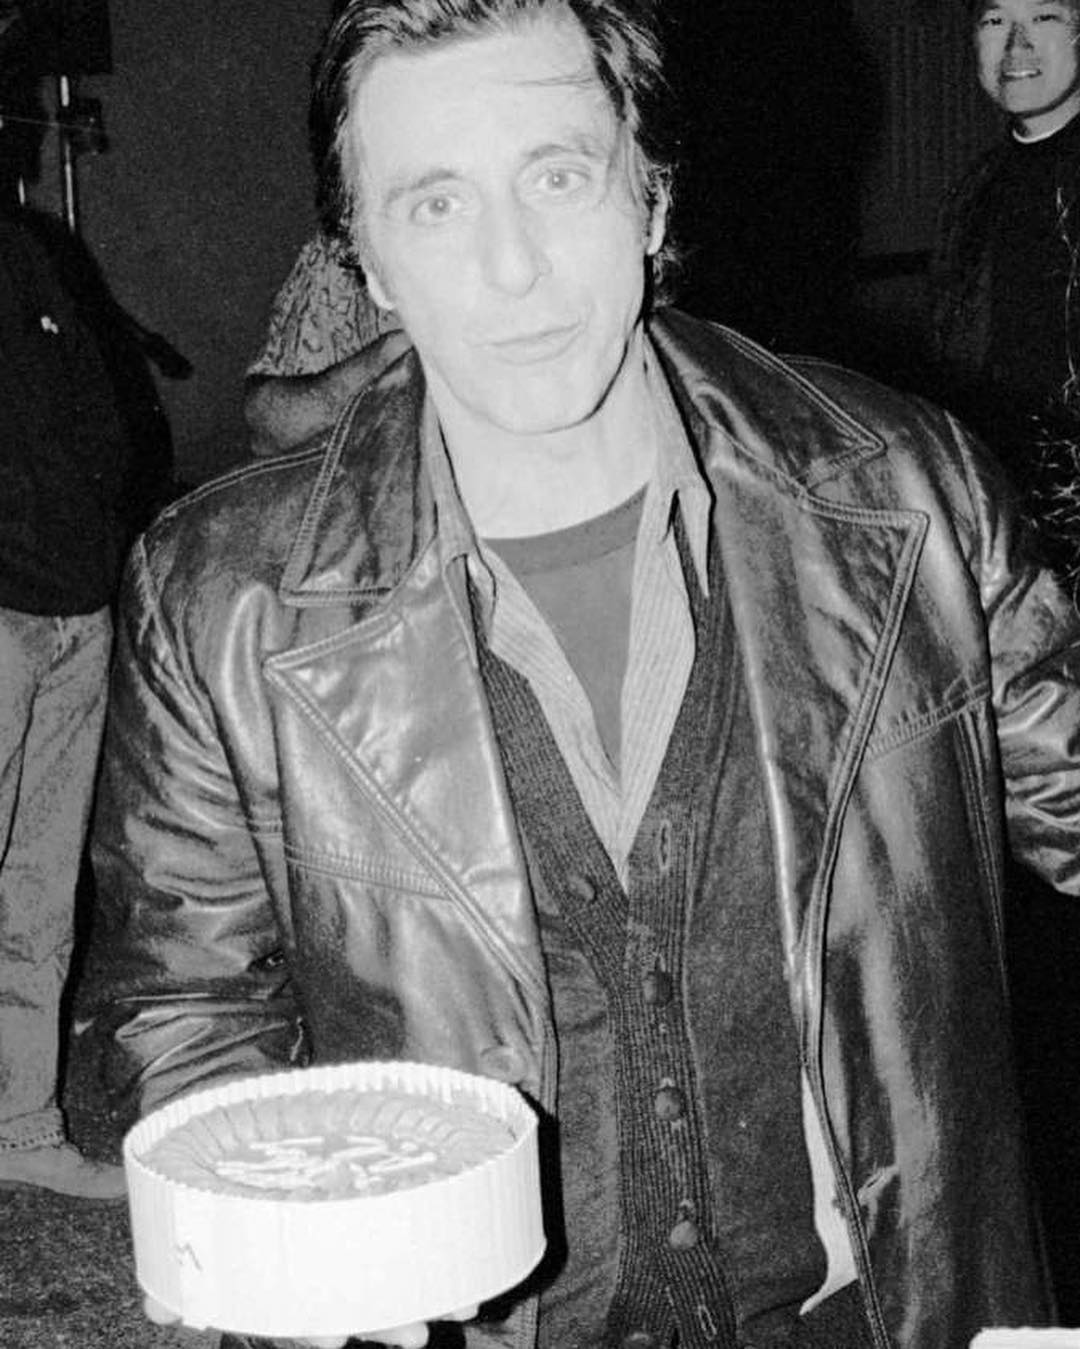 Al Pacino Celebrated His Birthday Filming 'The Donnie Brasco Story' With Johnny Depp In Staten Island, 1996.